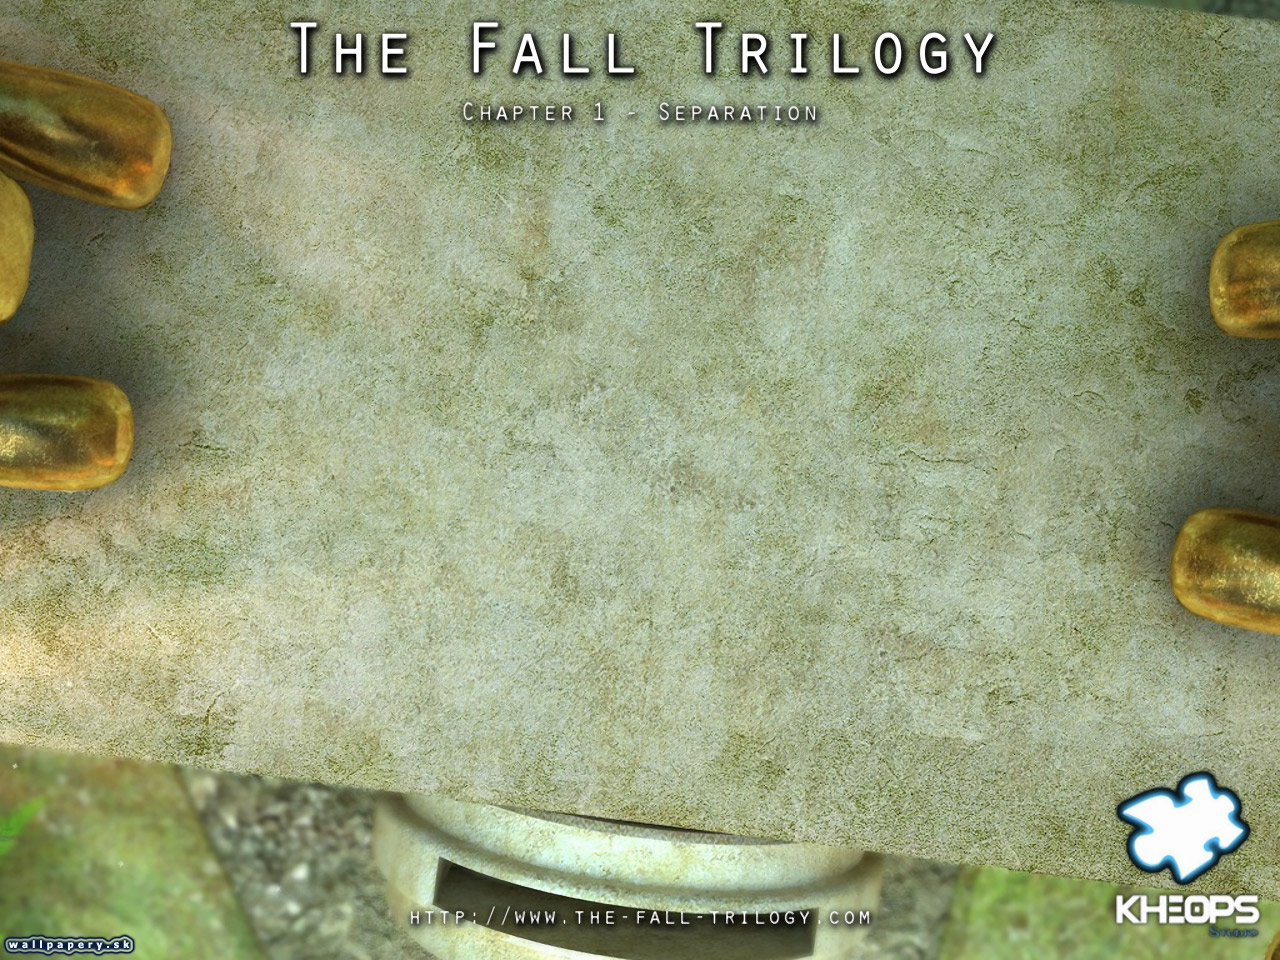 The Fall Trilogy - Chapter 1: Separation - wallpaper 11